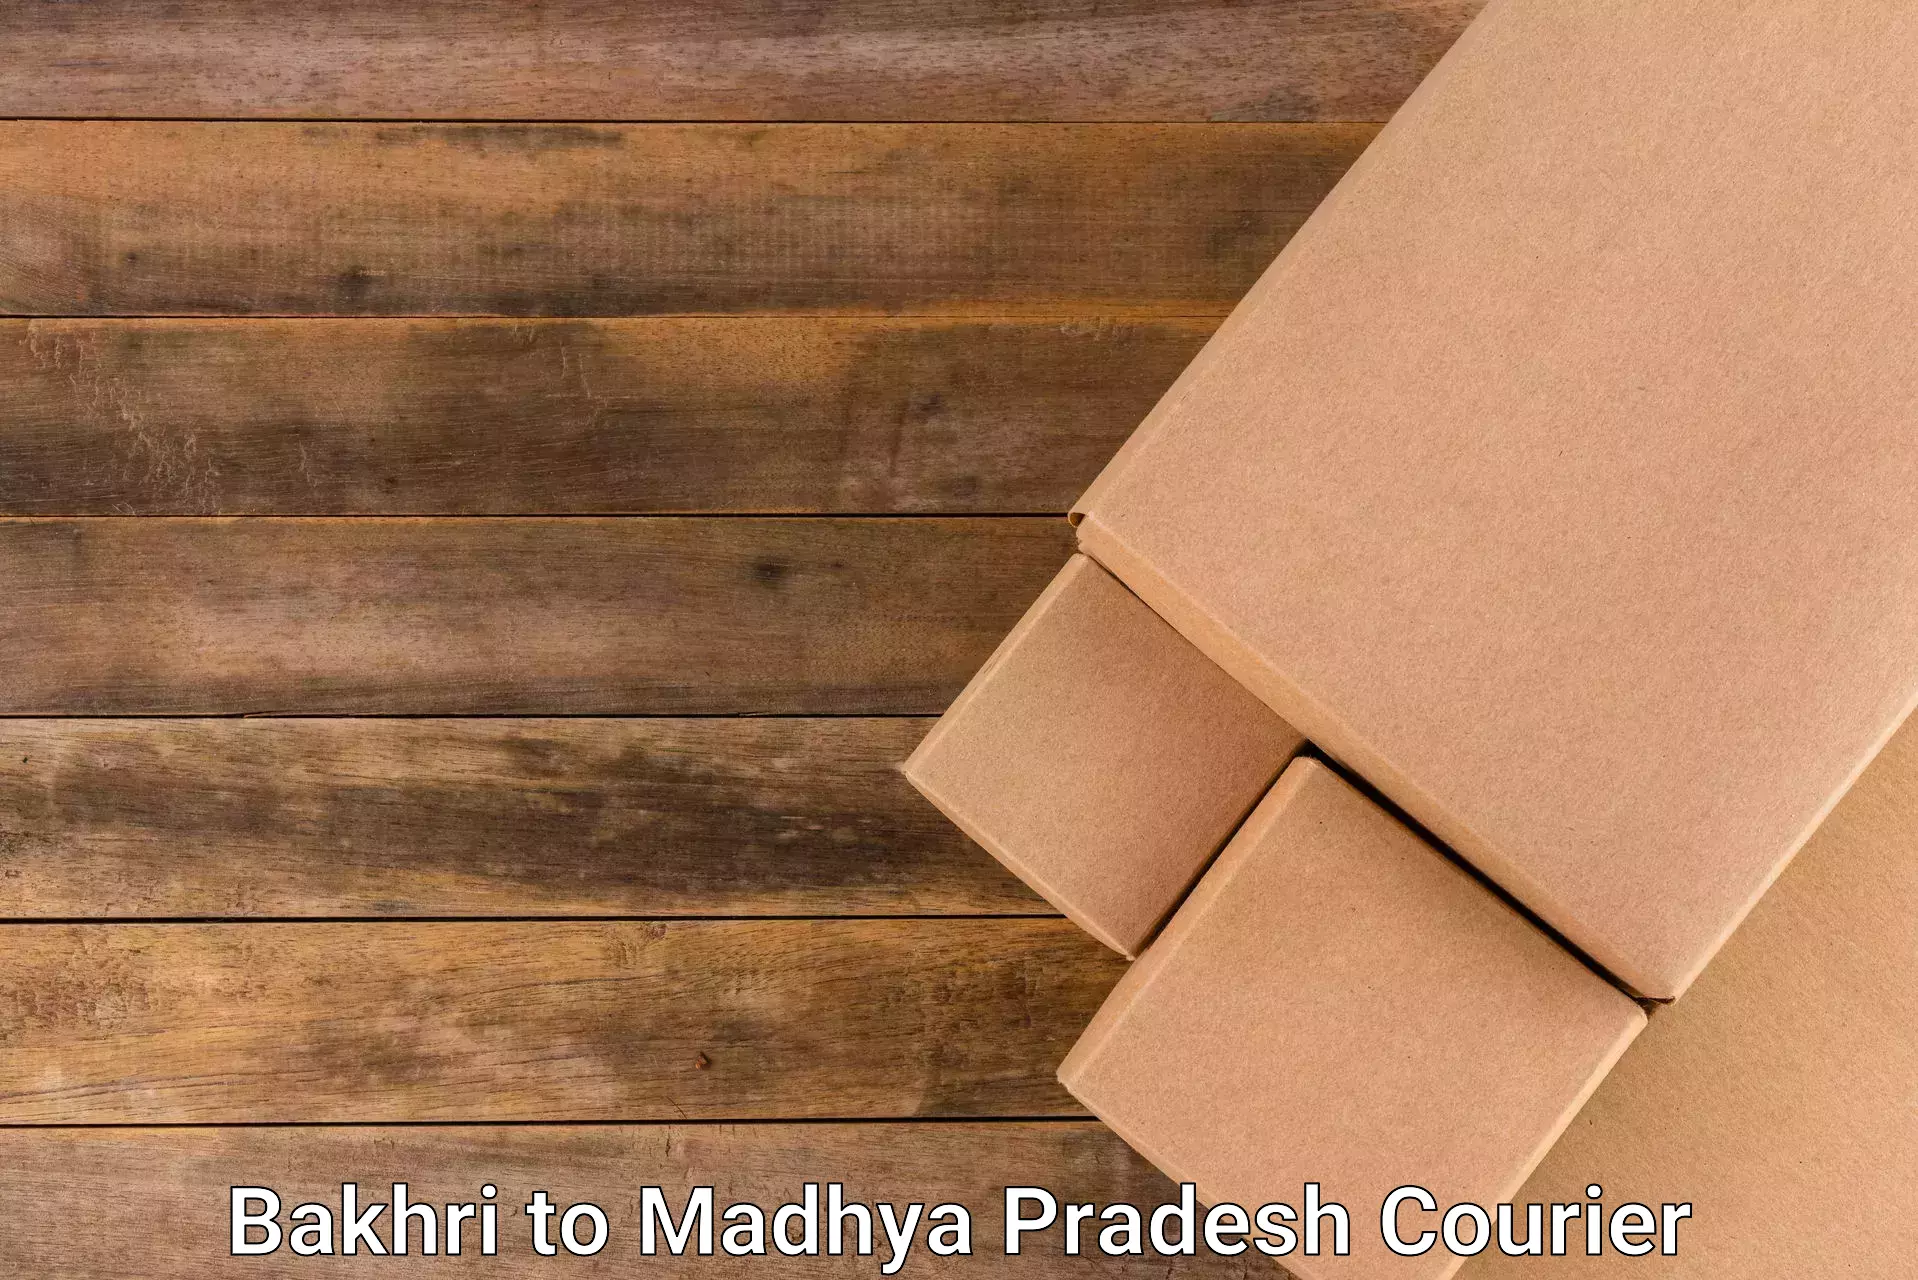 Easy access courier services Bakhri to Mandideep